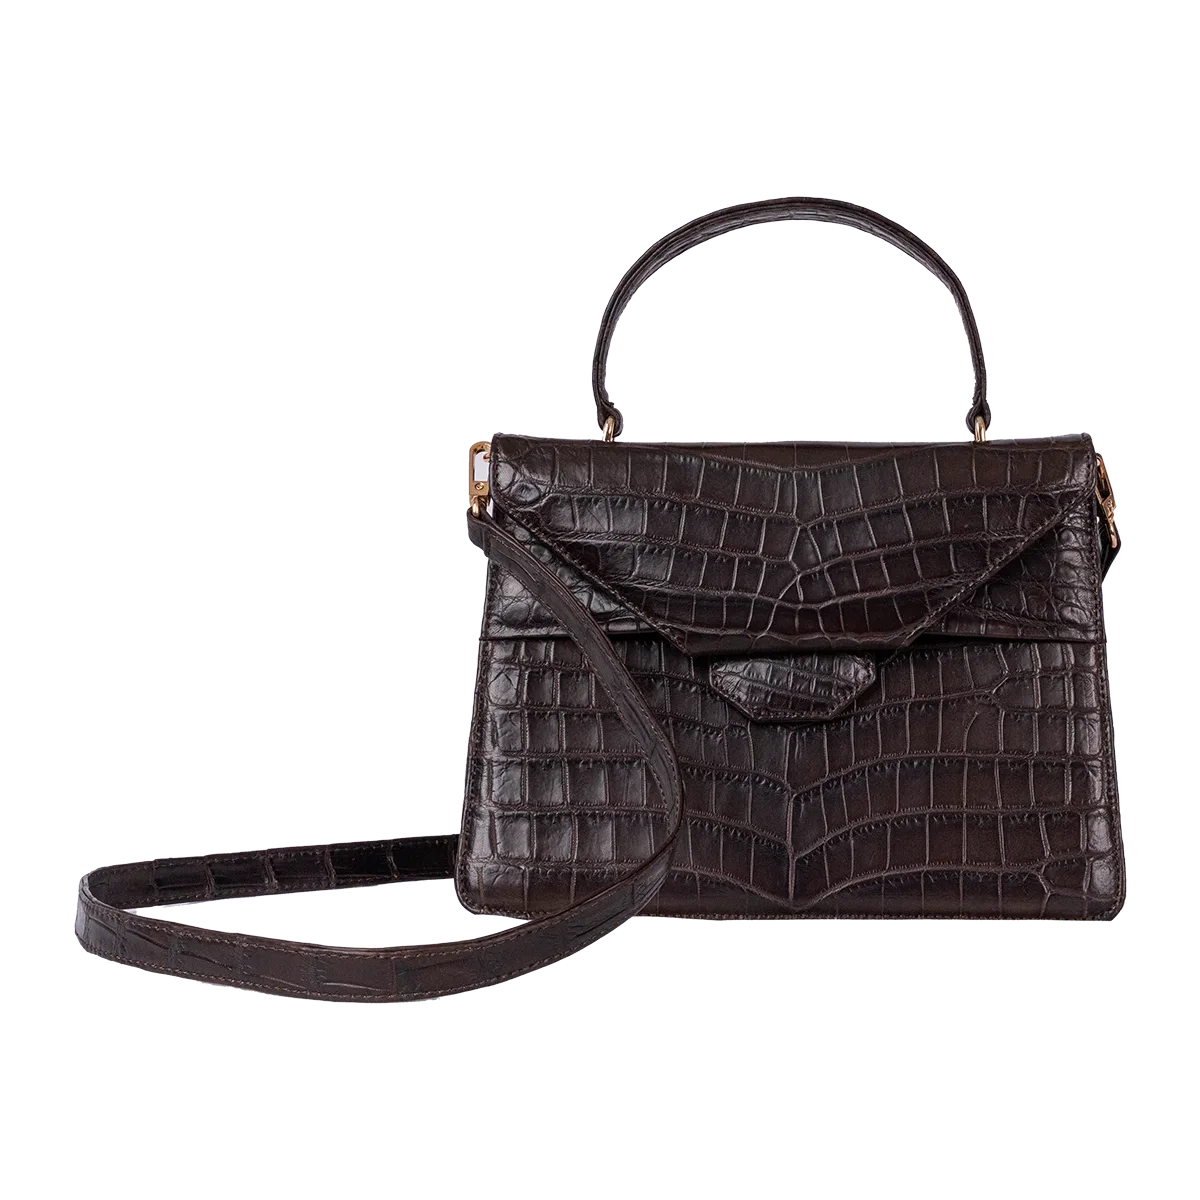 The Everyday Betty An in Espresso Nile Crocodile - Norton and Hodges